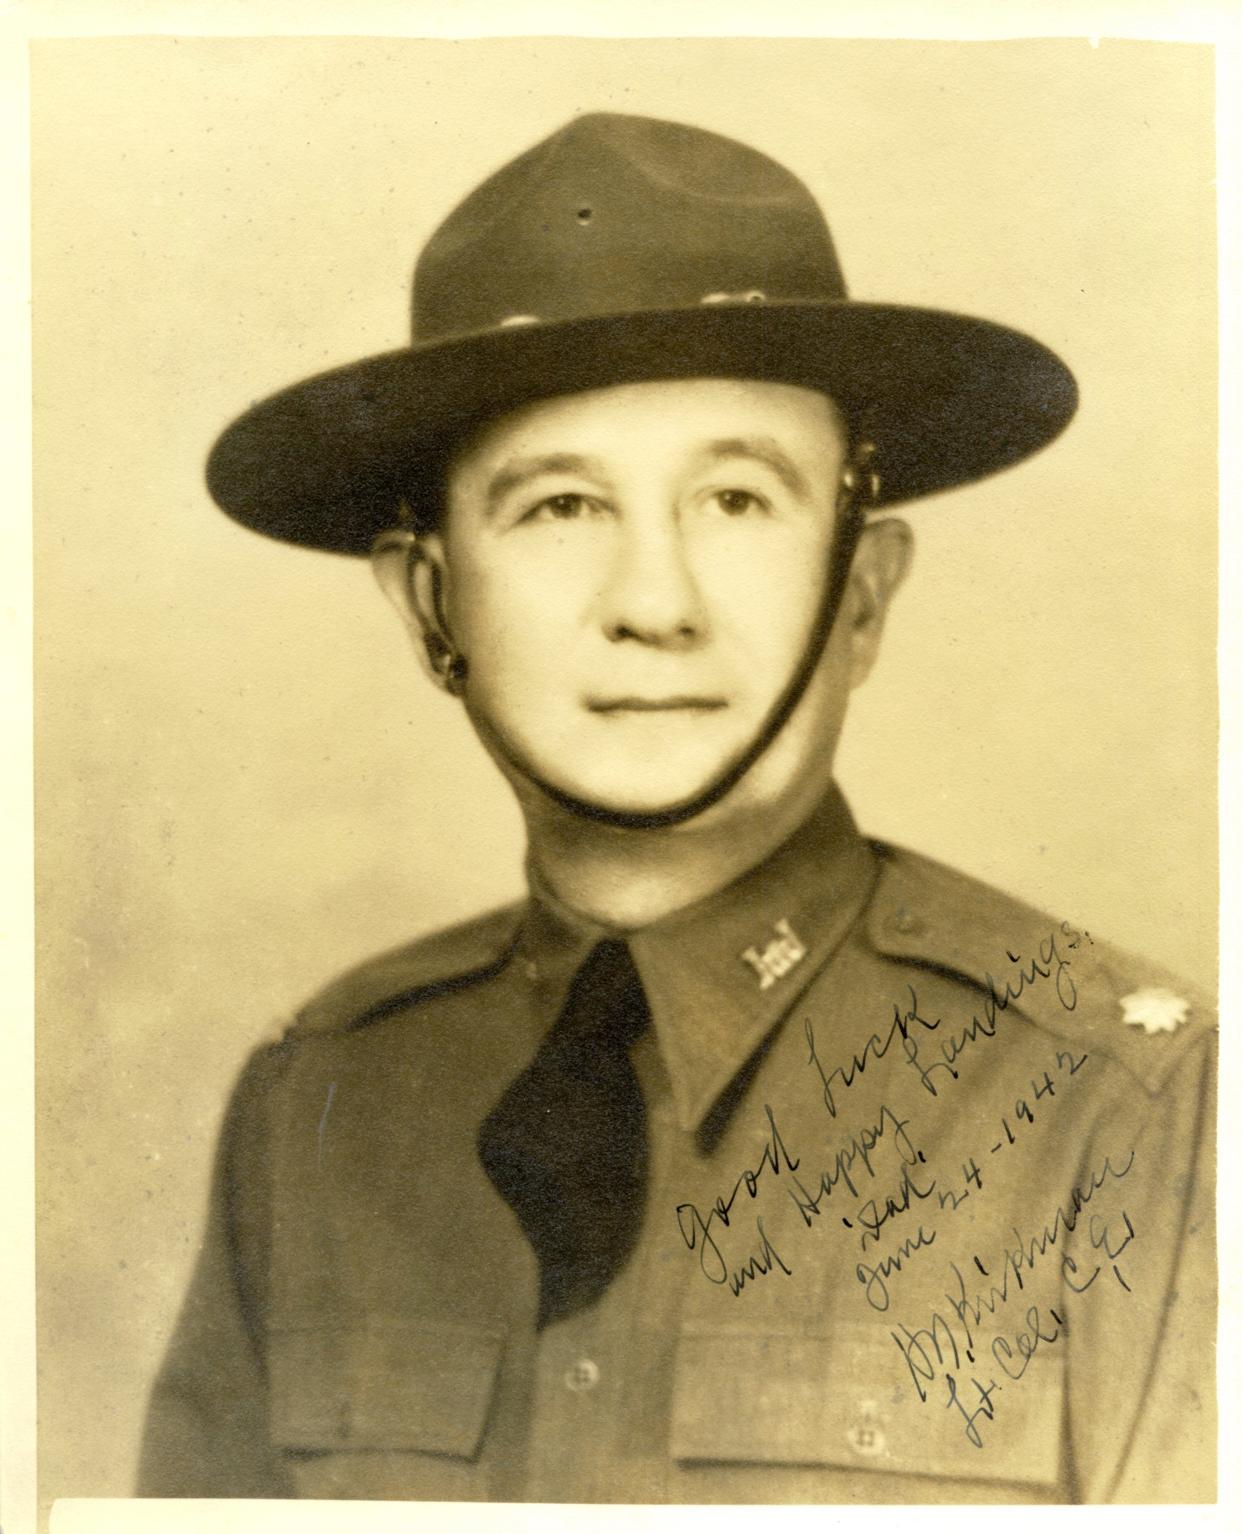 Col. Neil Kirkman, shown in his uniform in 1942,  was inducted into the Florida Law Enforcement Officers Hall of Fame (posthumously) earlier in 2022.